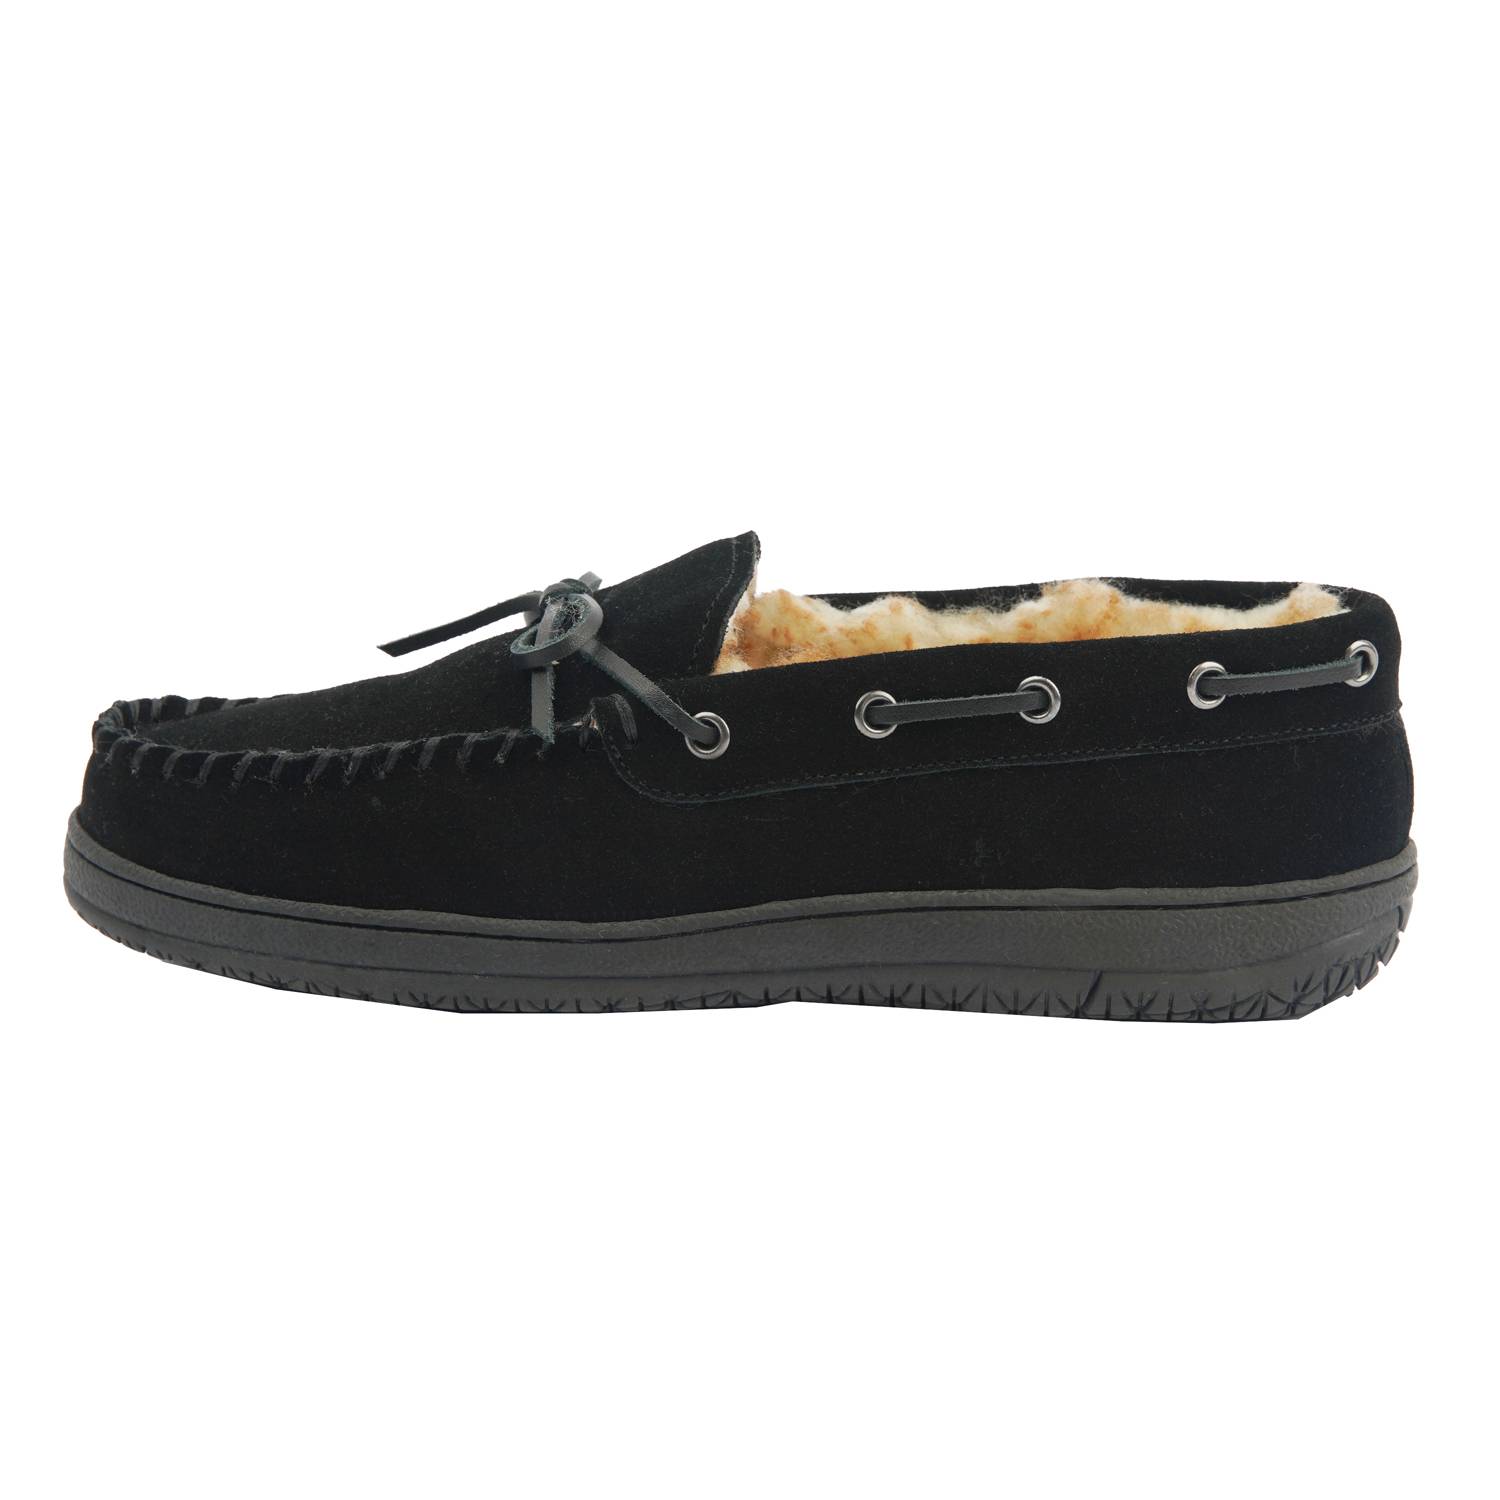 Men’s Leather Lace-Up Moccasin Slippers Featured Image